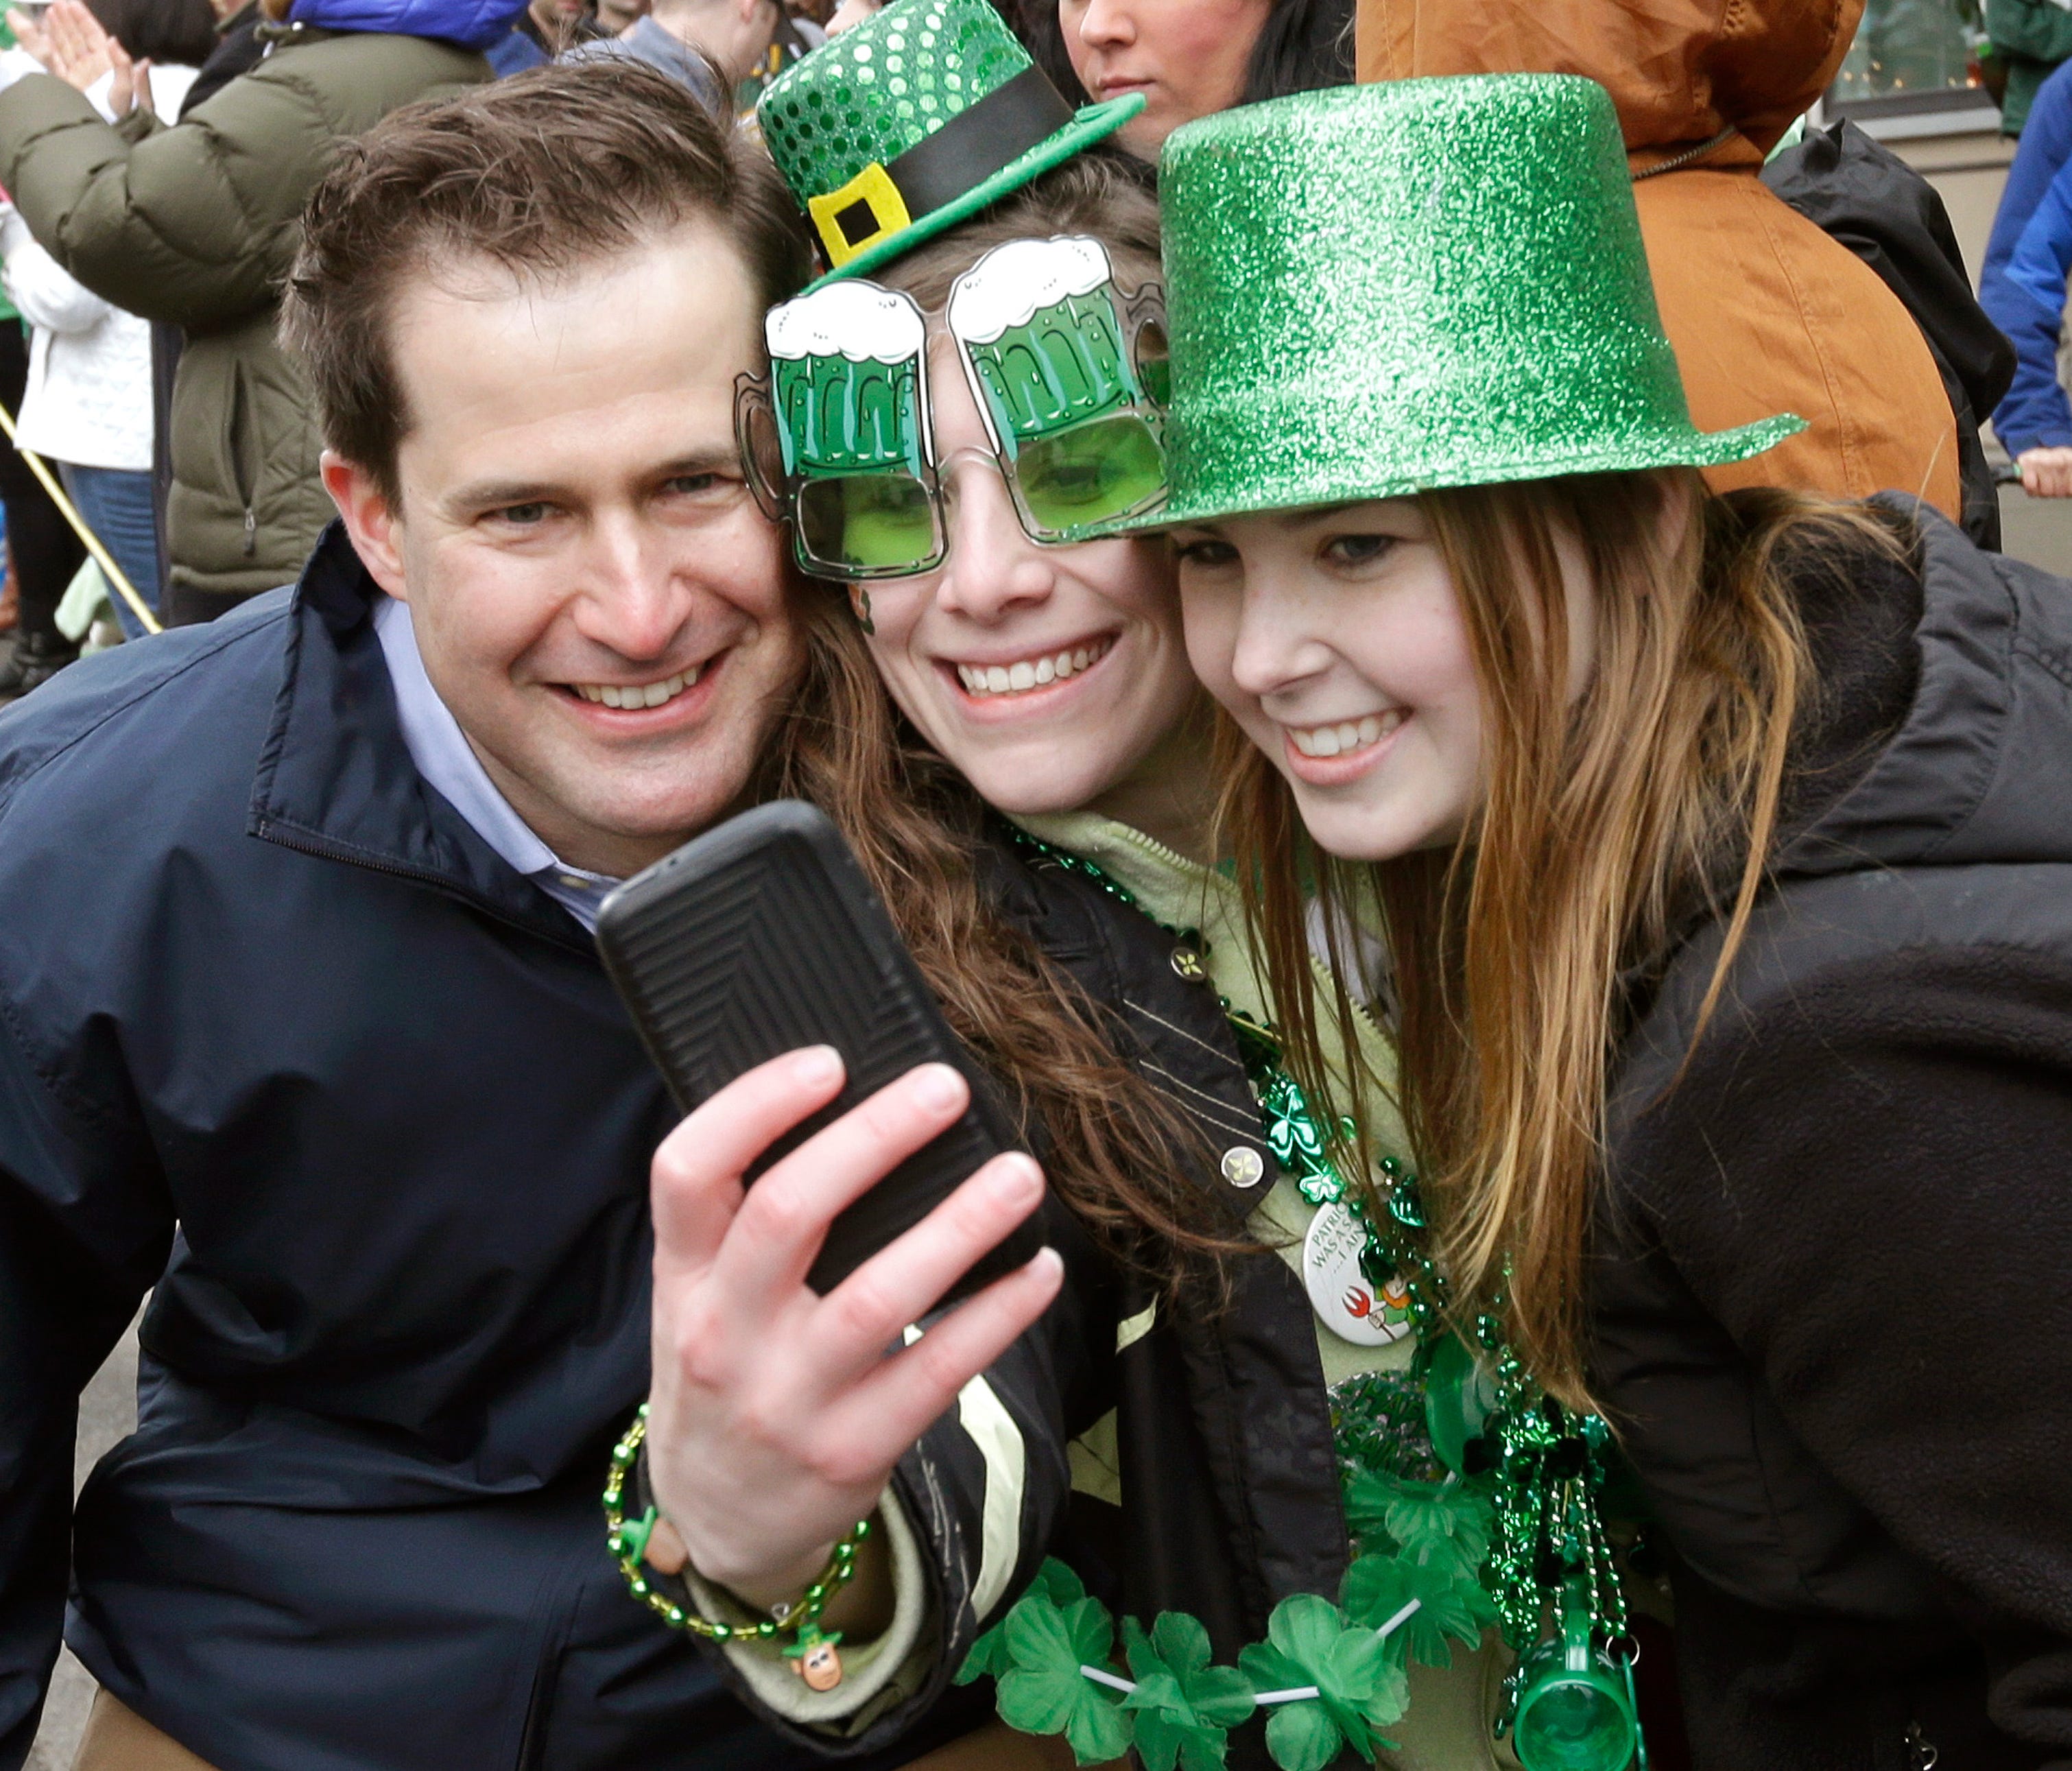 Boston came in at No. 3 on WalletHub's list of Best Cities for St. Patrick's Day.